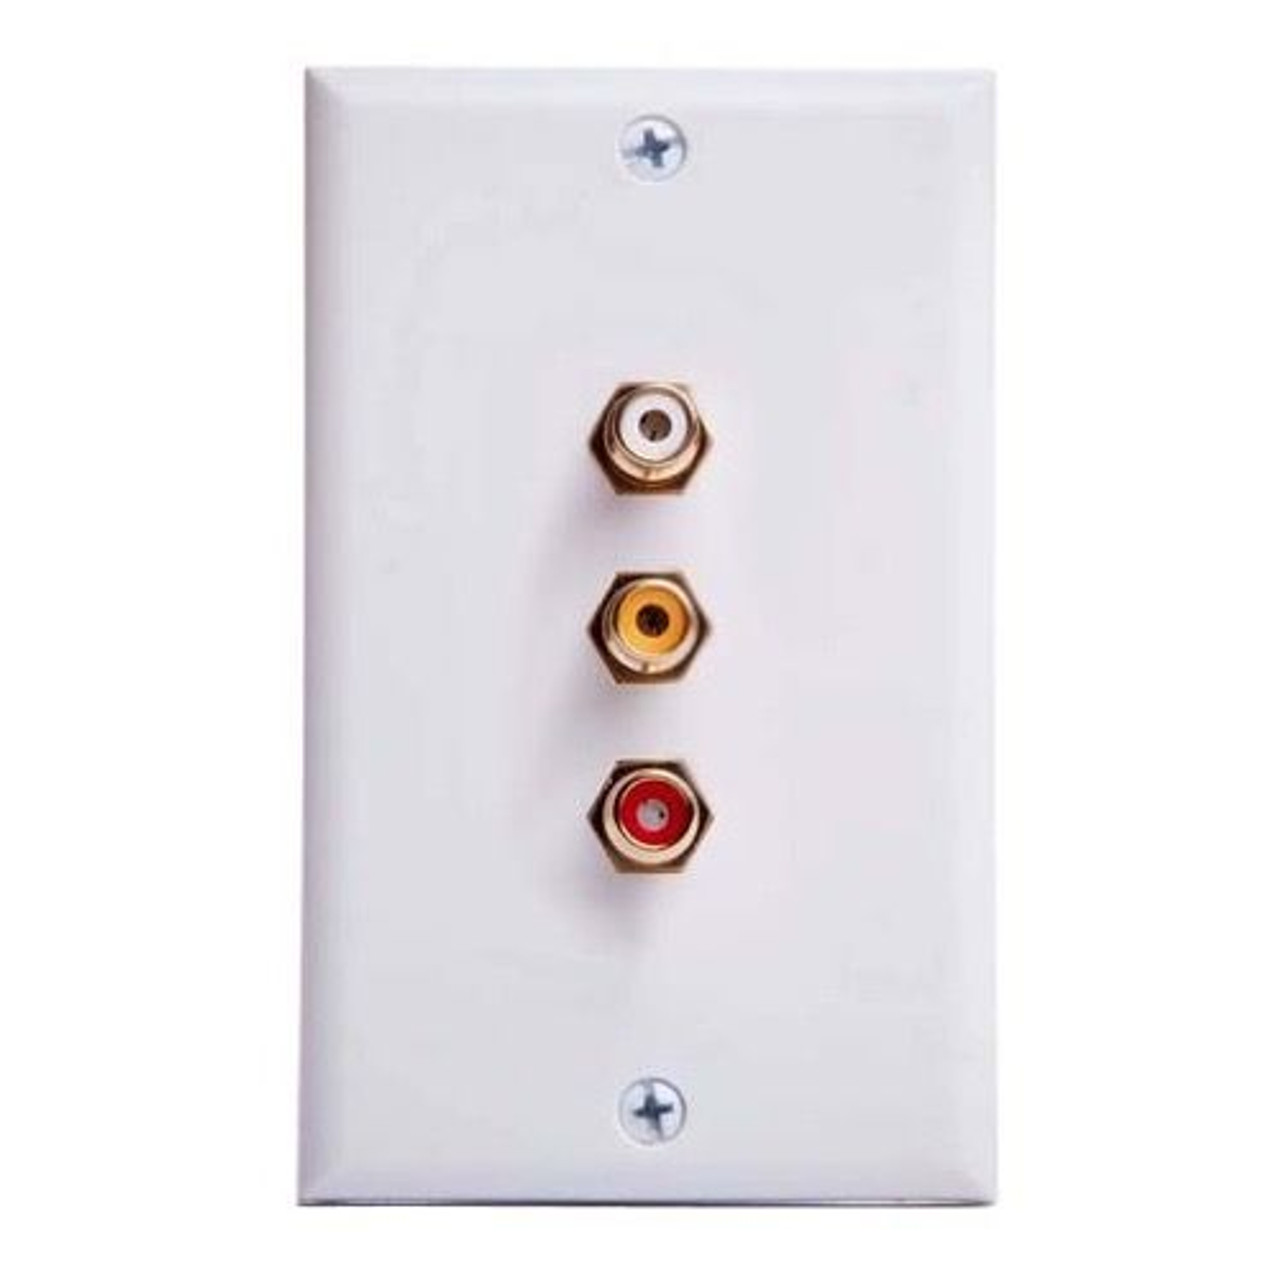 Steren 200-260WH Triple RCA Wall Plate White Yellow Red Gold Speaker 3 Way AV Plug Connect Audio Video Signal Line Wire Flush Mount Outlet Cover with Triple Plugs Hook-Up, Part # 200260-WH